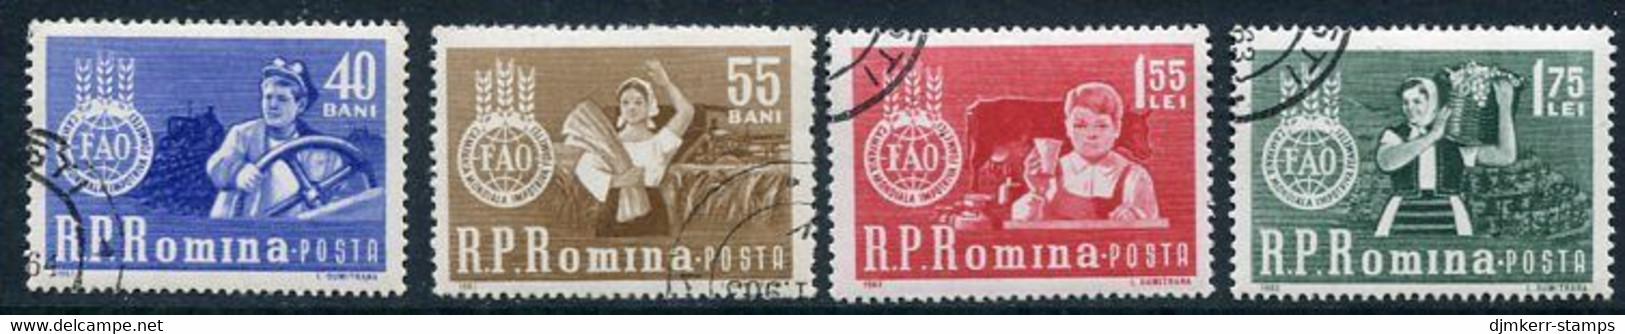 ROMANIA 1963  Freedom From Hunger Used  Michel 2126-29 - Used Stamps